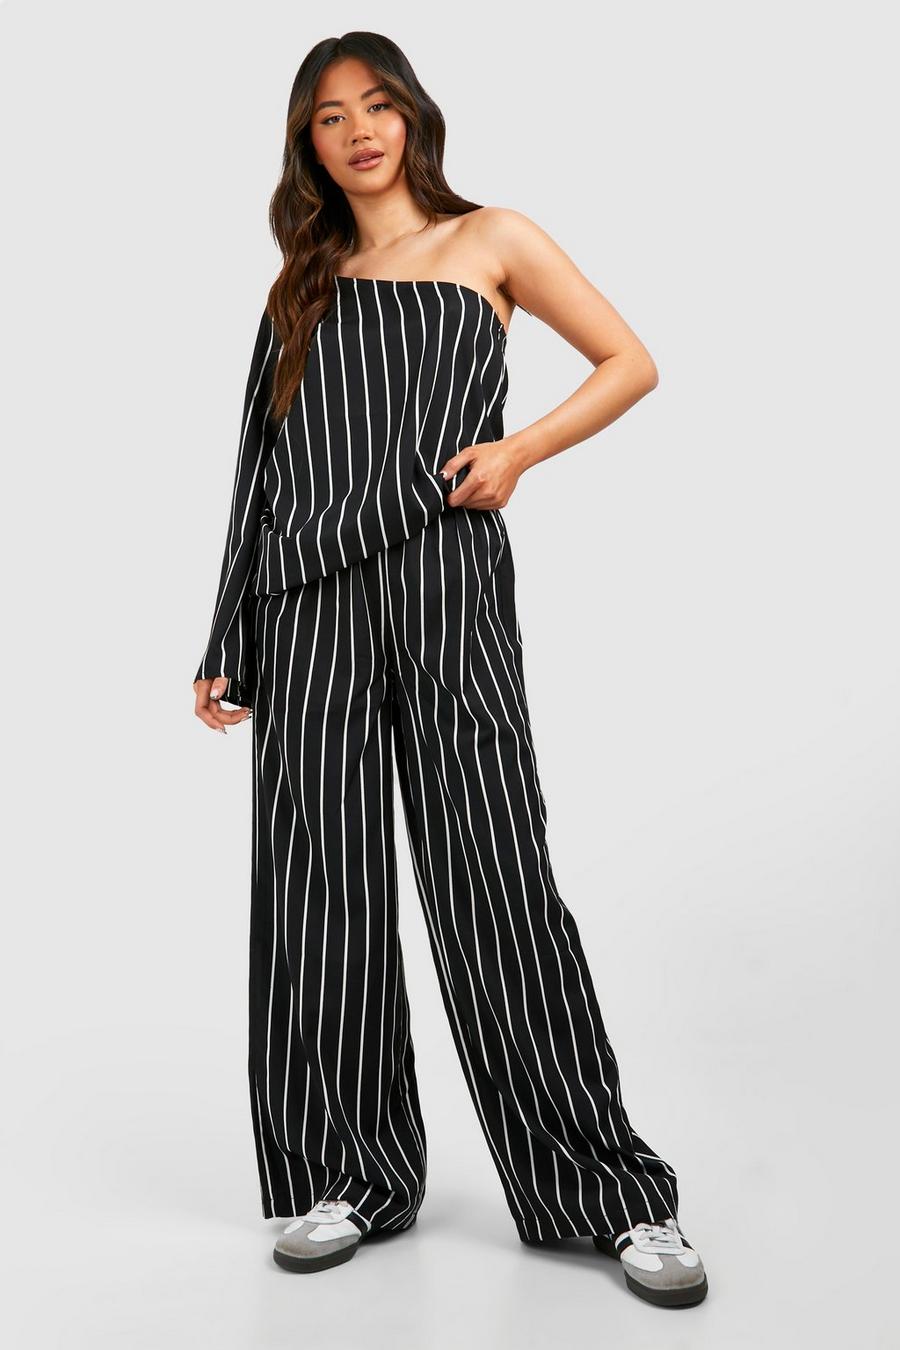 Black Stripe Top And Pants Two-Piece